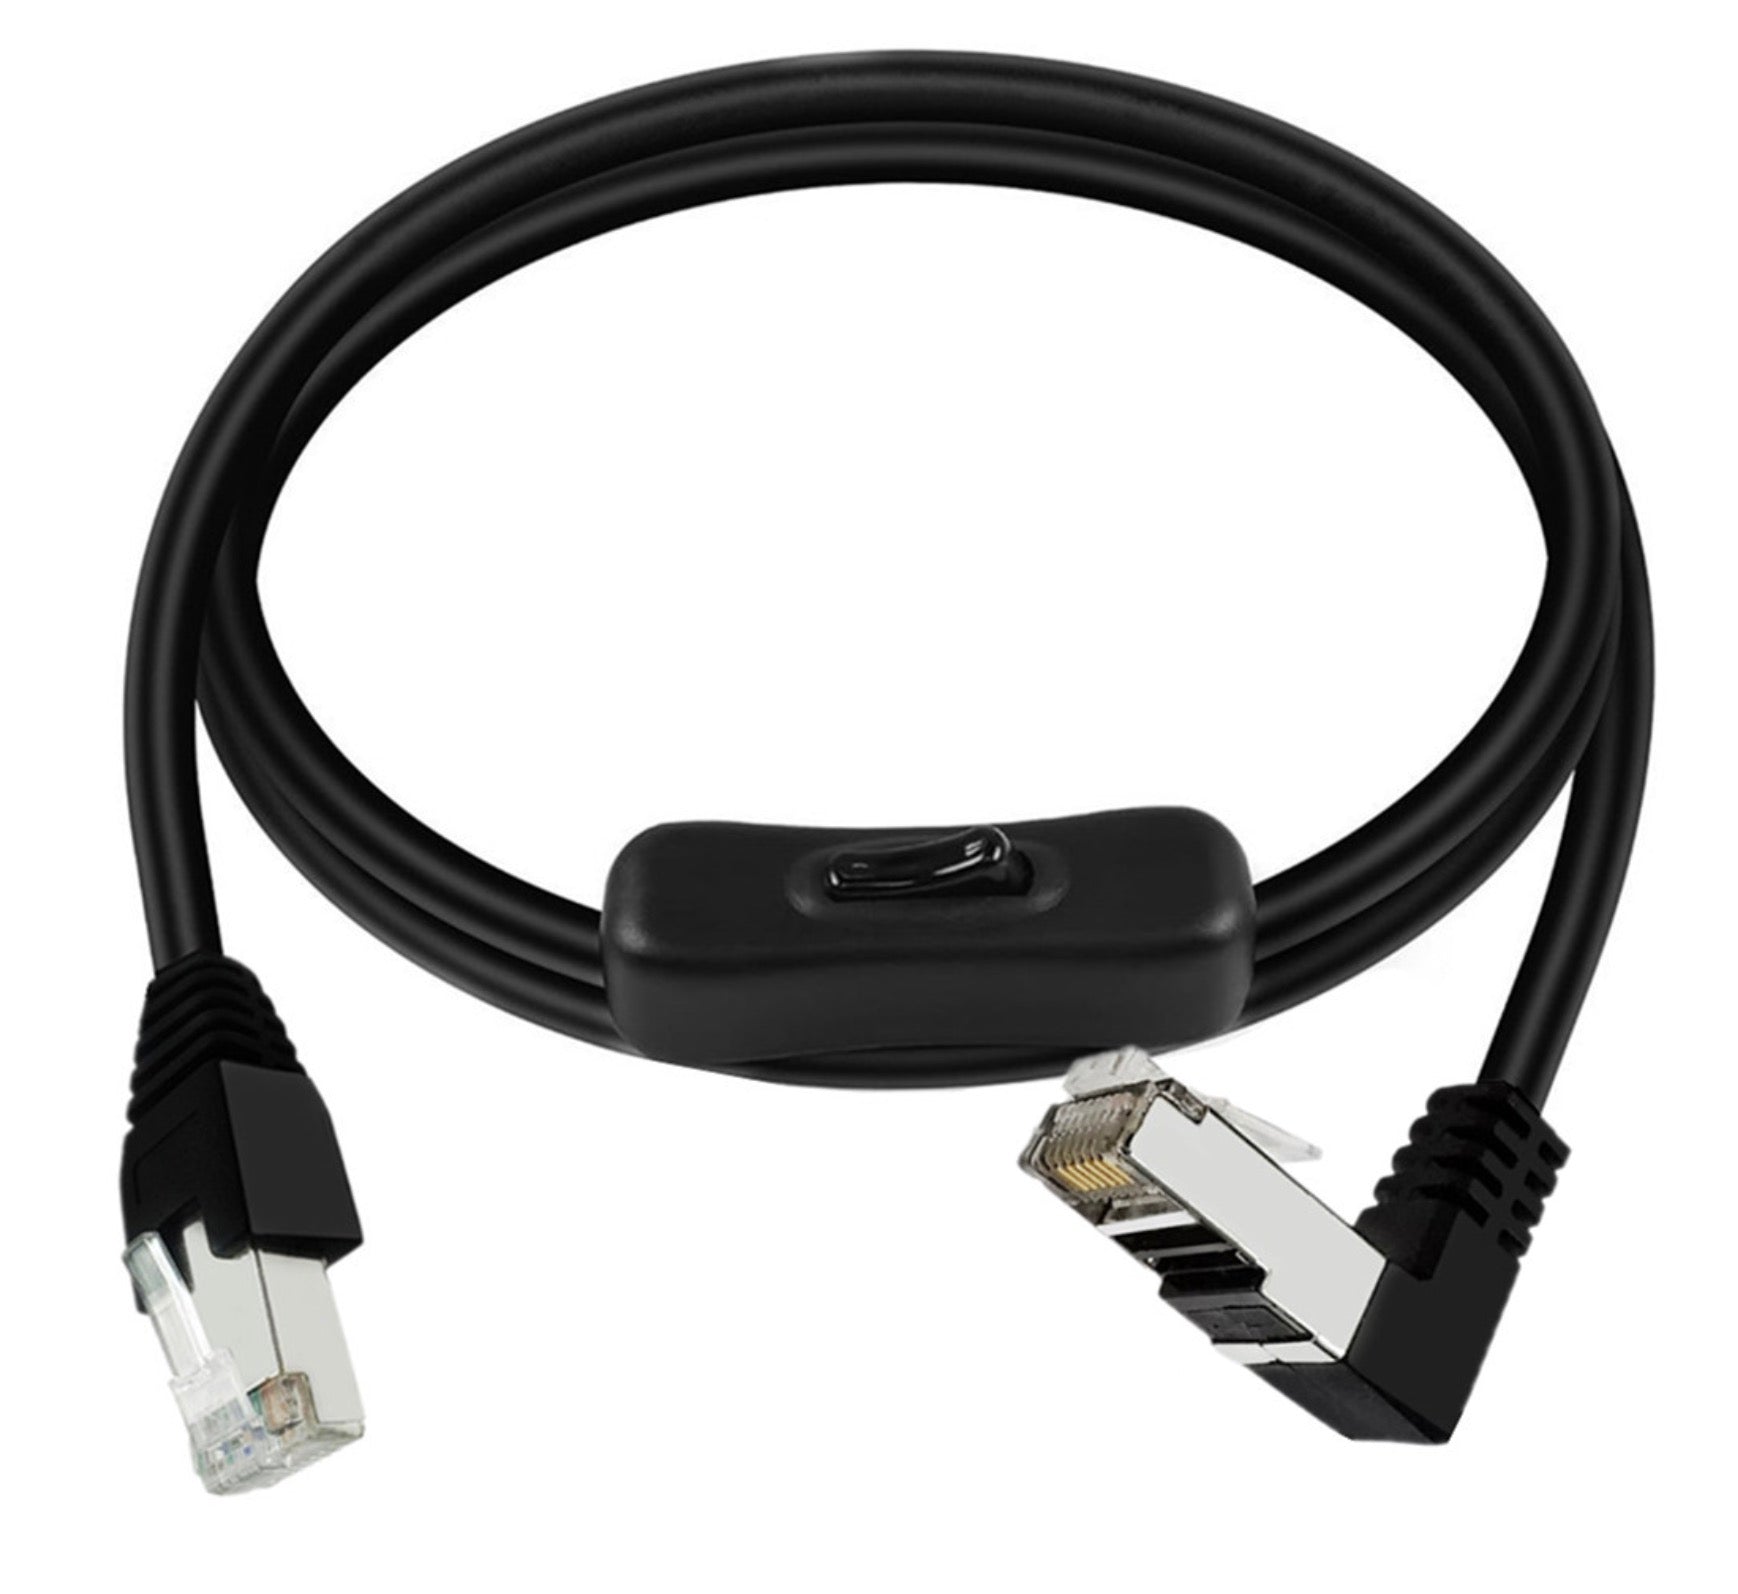 Cat6 Ethernet Patch Cable Switch On/Off RJ45 Male to Male High Speed Internet Network Cable LAN with Disconnect Switch Down Angle